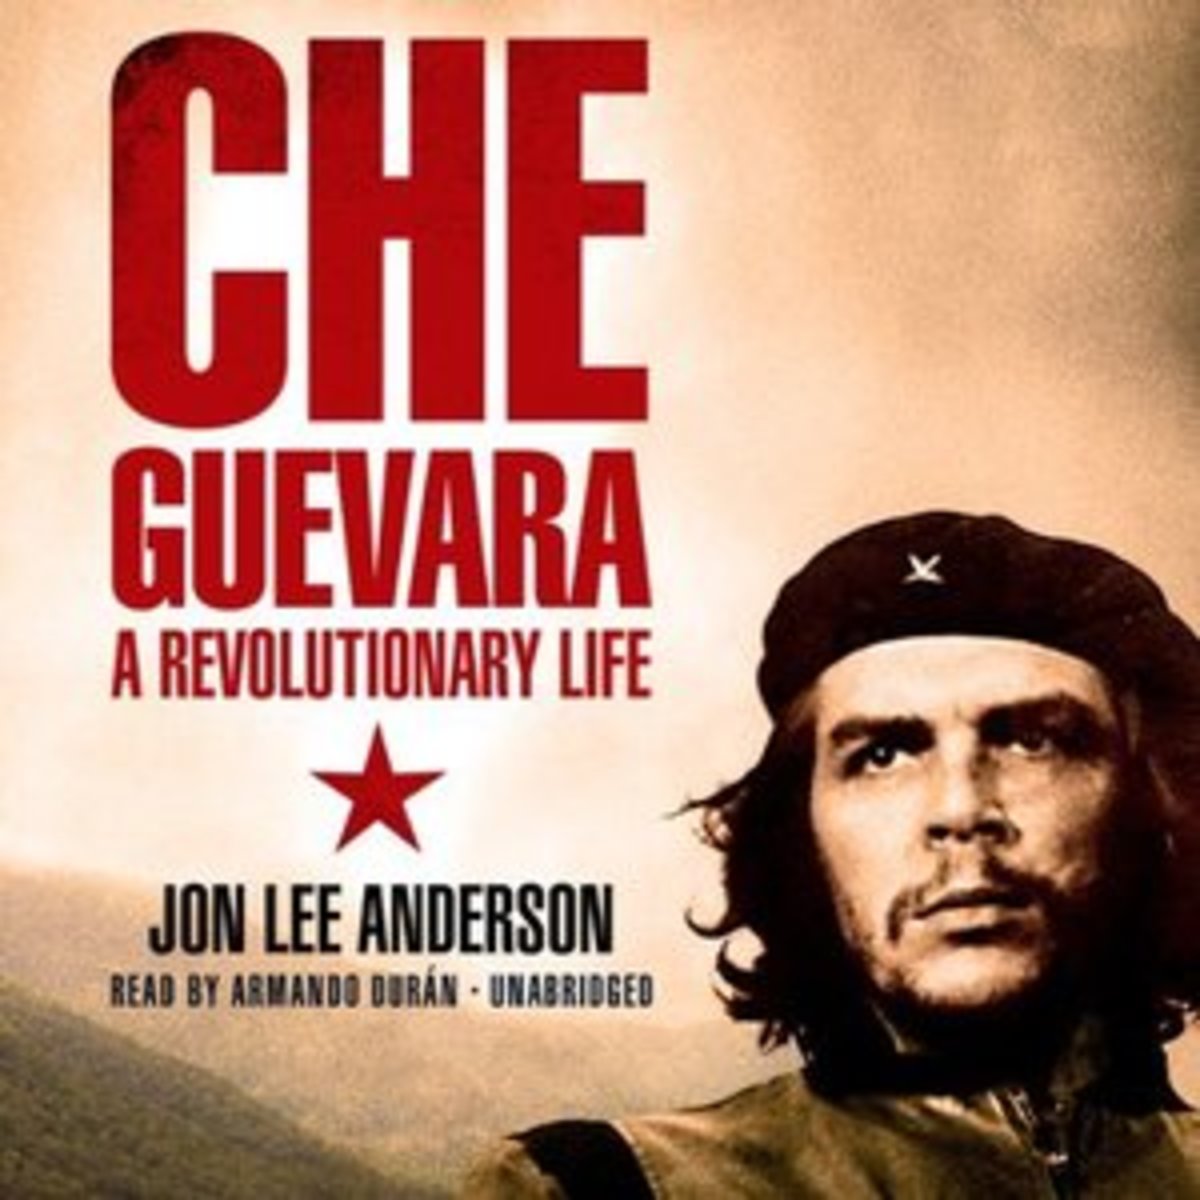 Audiobook Review: Che Guevara: A Revolutionary Life, by Jon Lee Anderson